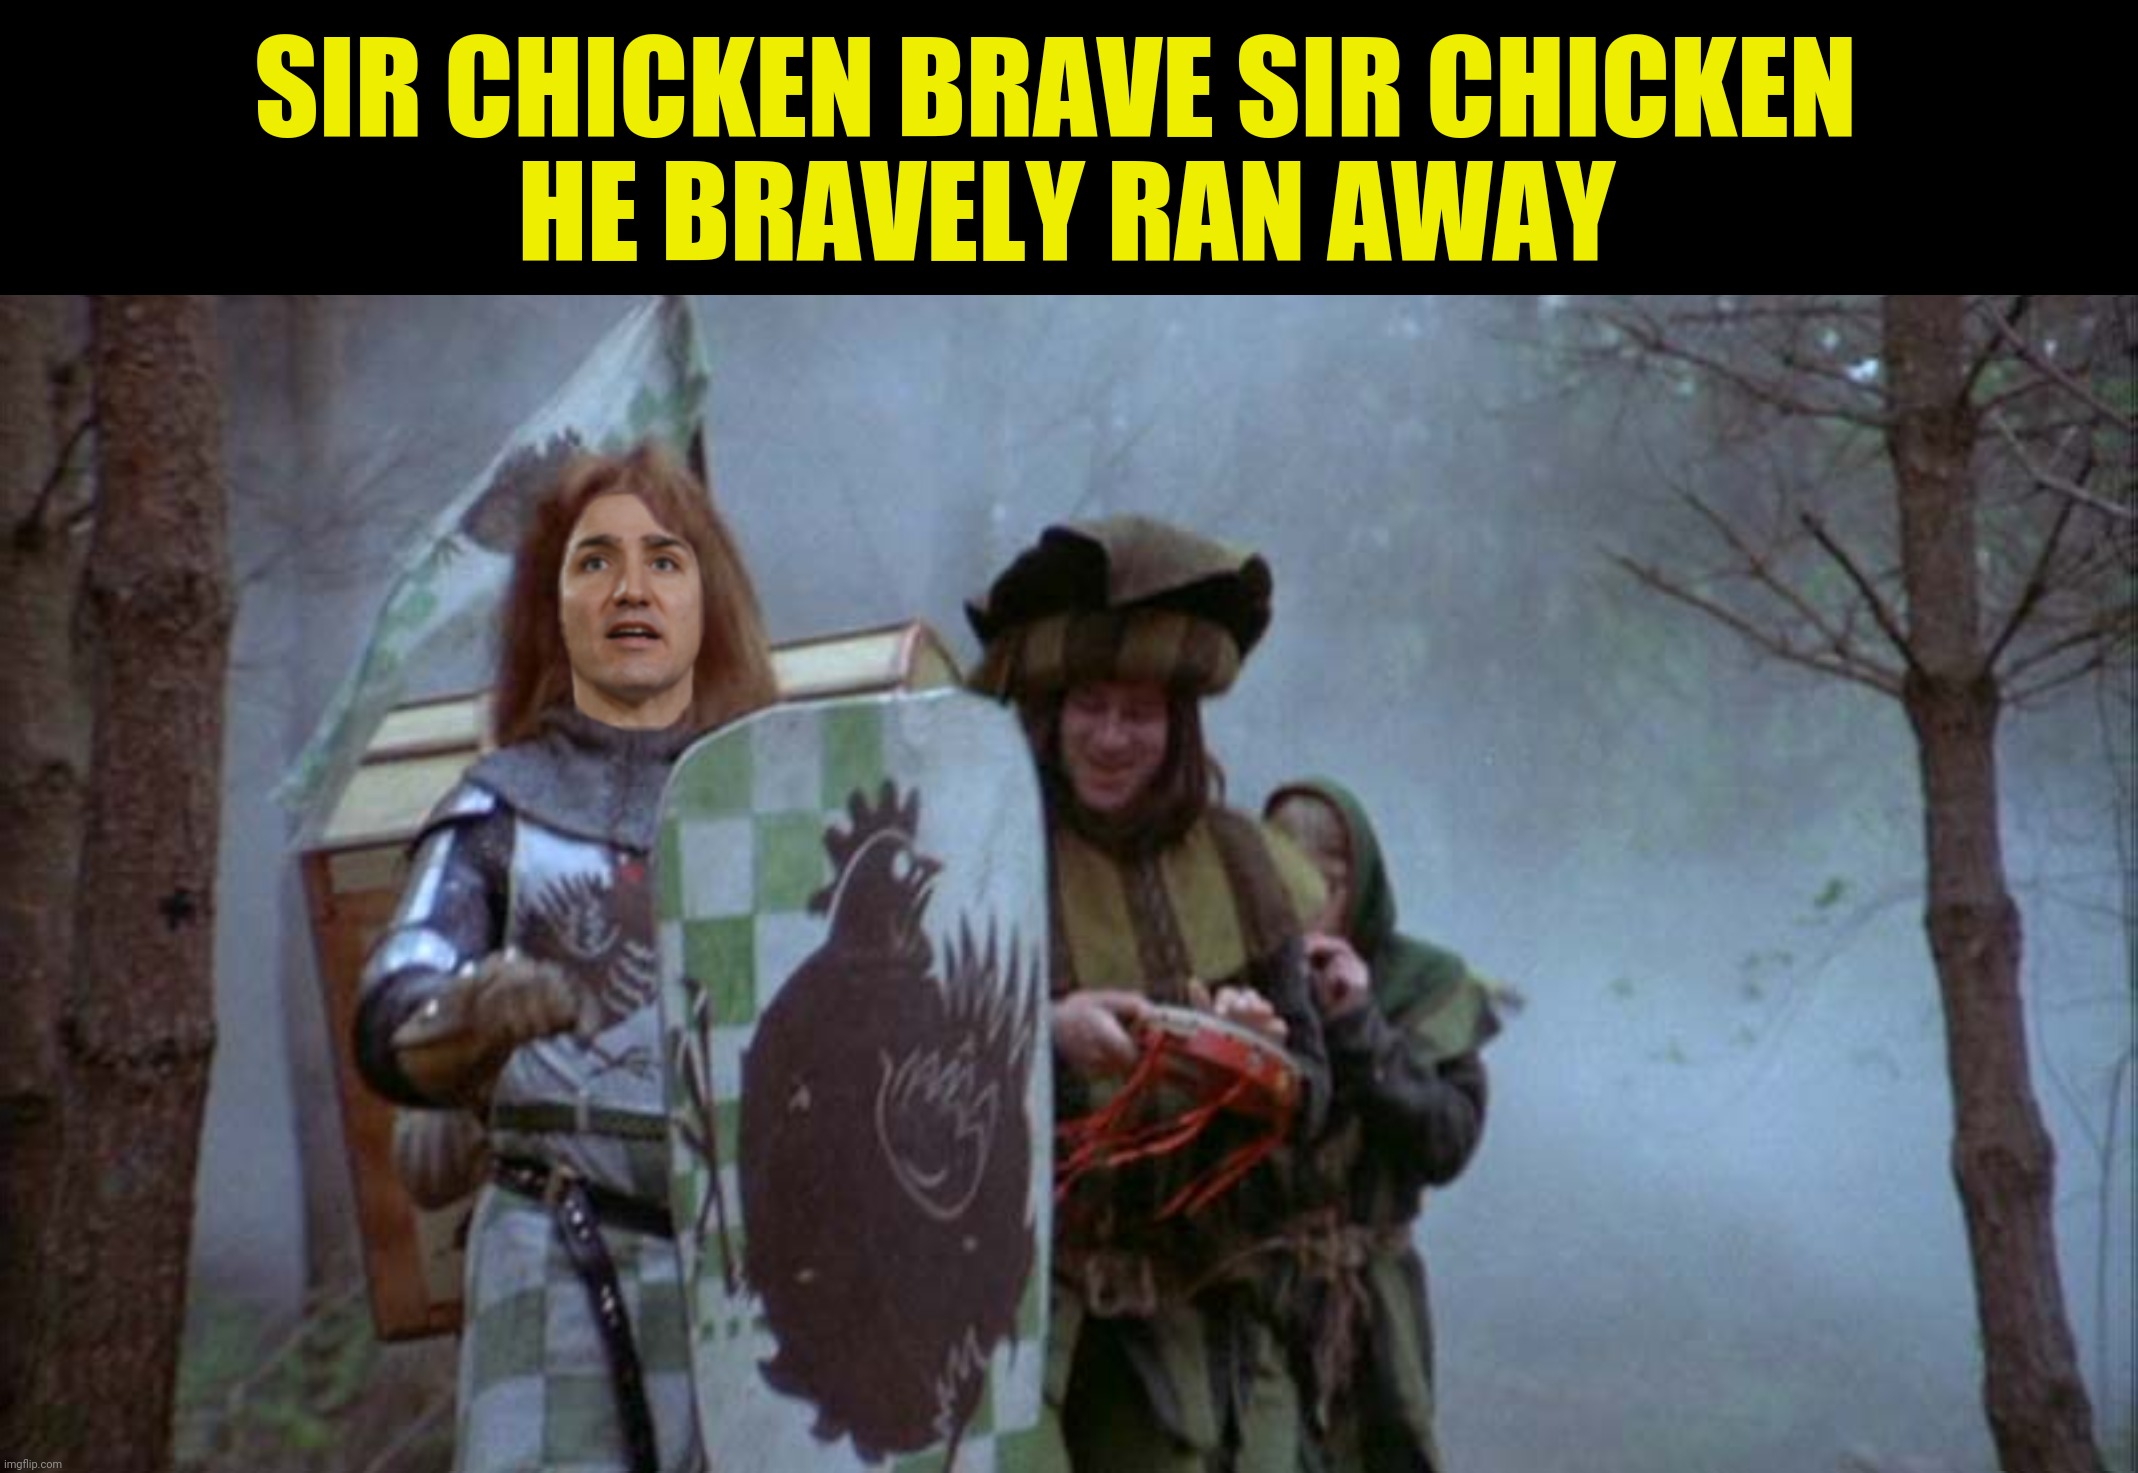 When danger reared its ugly head he bravely turned his tail and fled | SIR CHICKEN BRAVE SIR CHICKEN 
HE BRAVELY RAN AWAY | image tagged in bad photoshop sunday,justin trudeau,monty python and the holy grail,sir robin,sir chicken | made w/ Imgflip meme maker